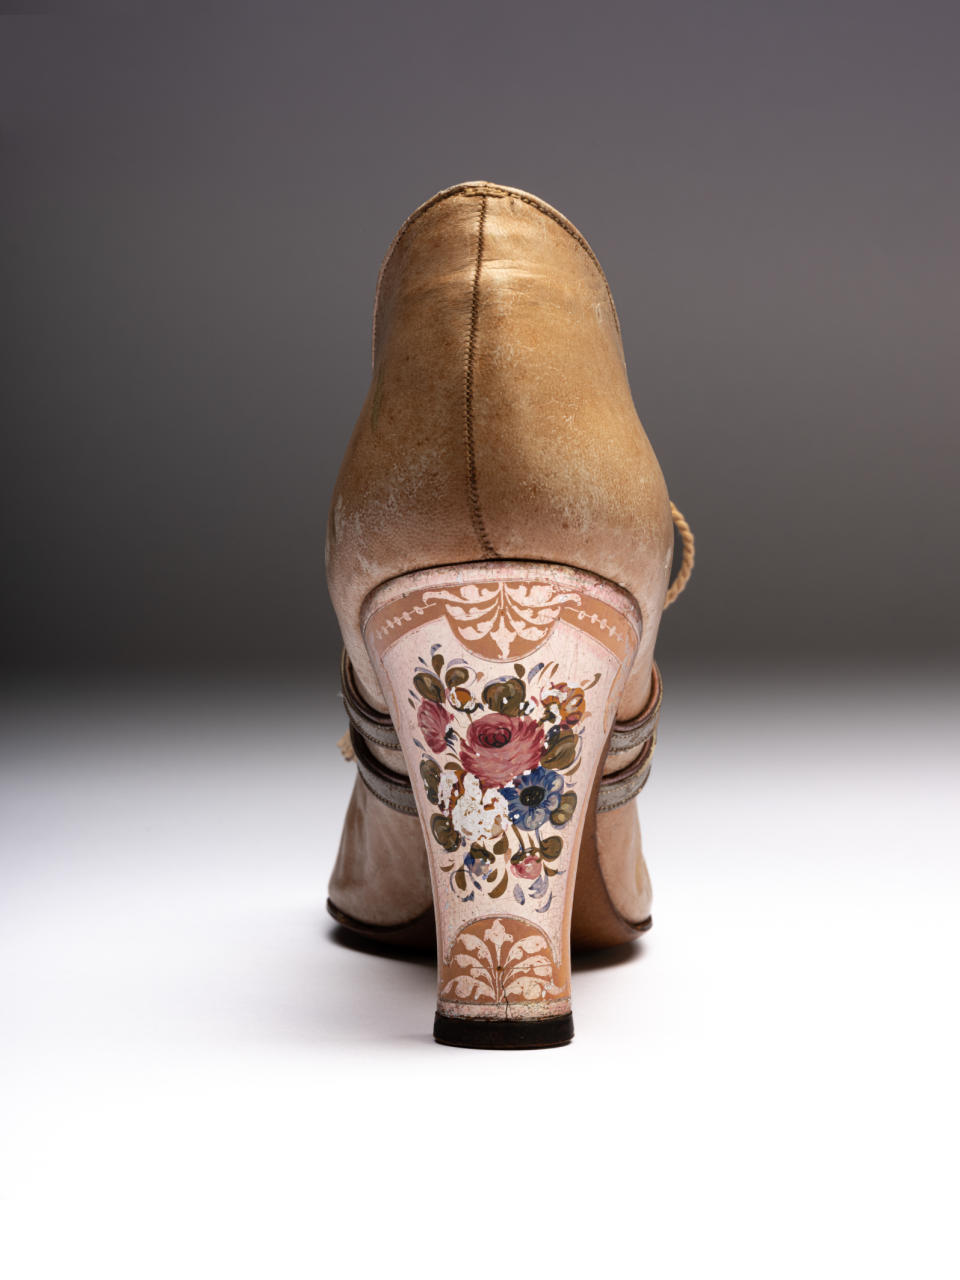 Kidskin laced shoe with hand-painted heel, 1927.